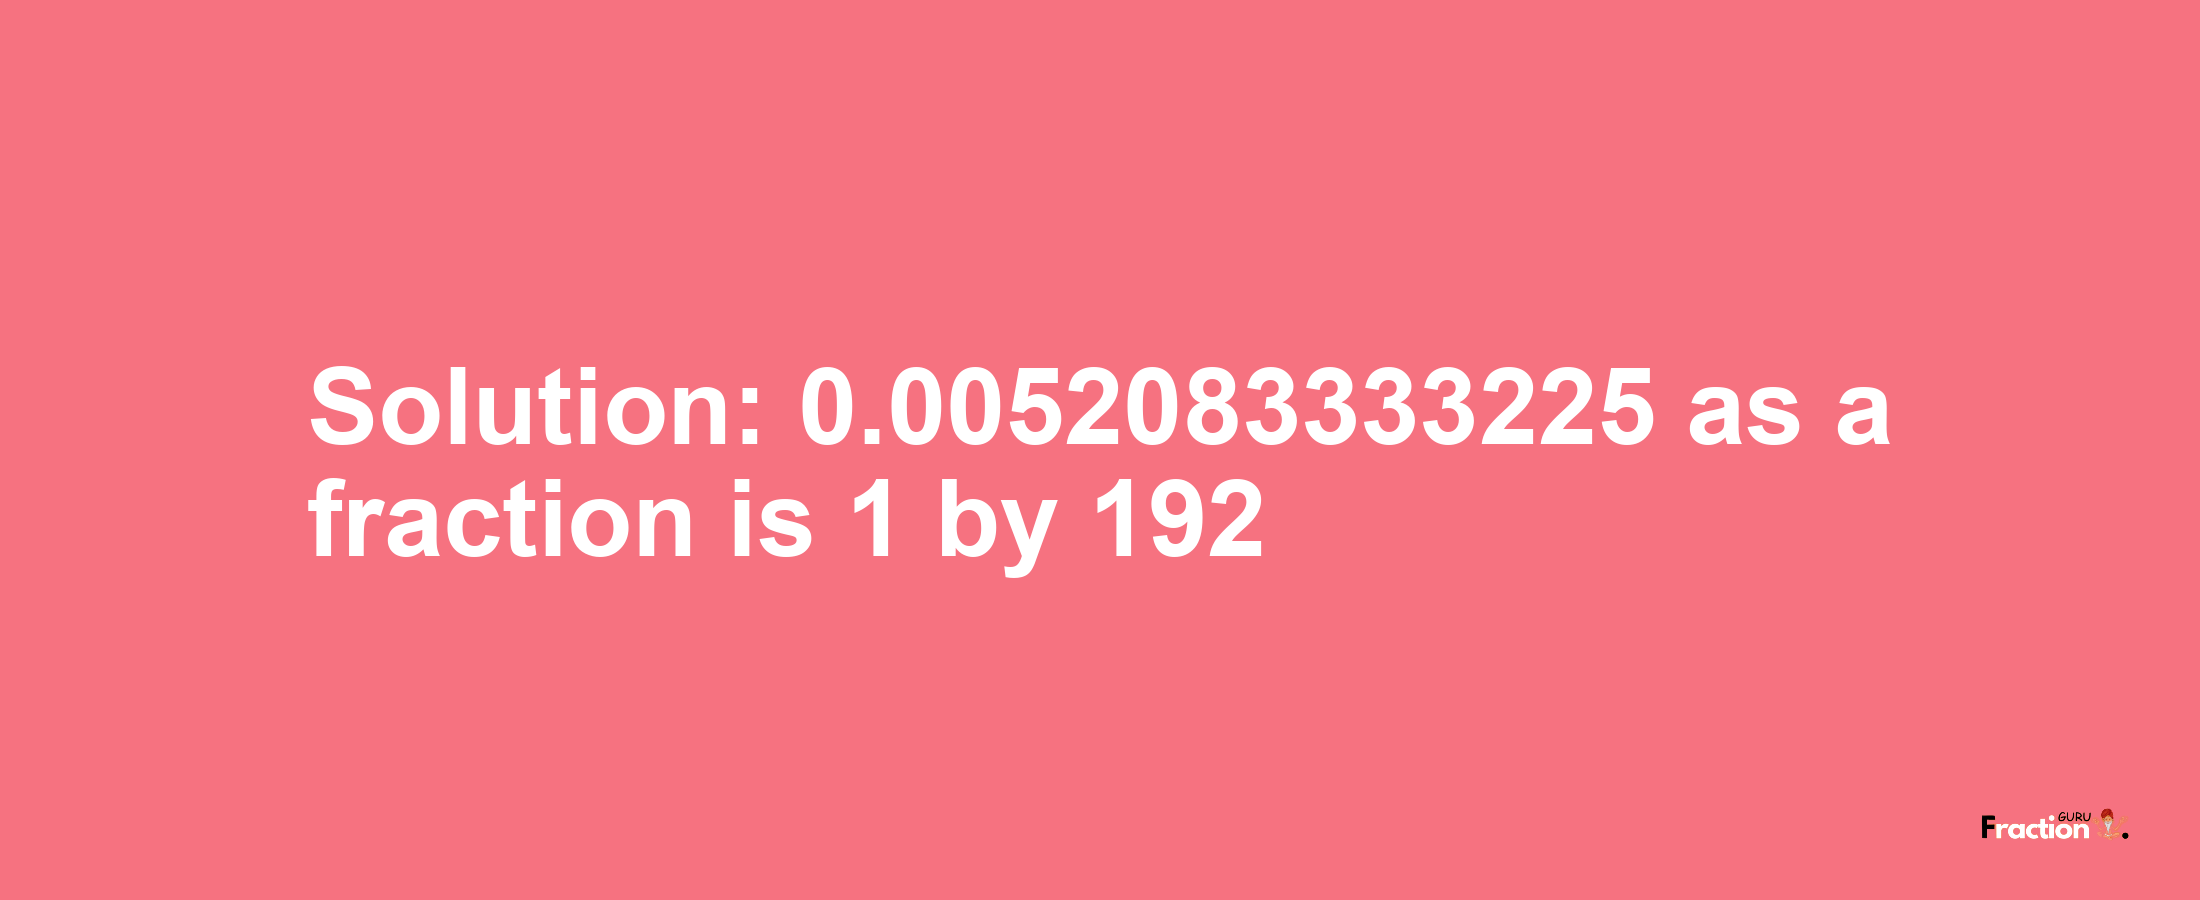 Solution:0.0052083333225 as a fraction is 1/192